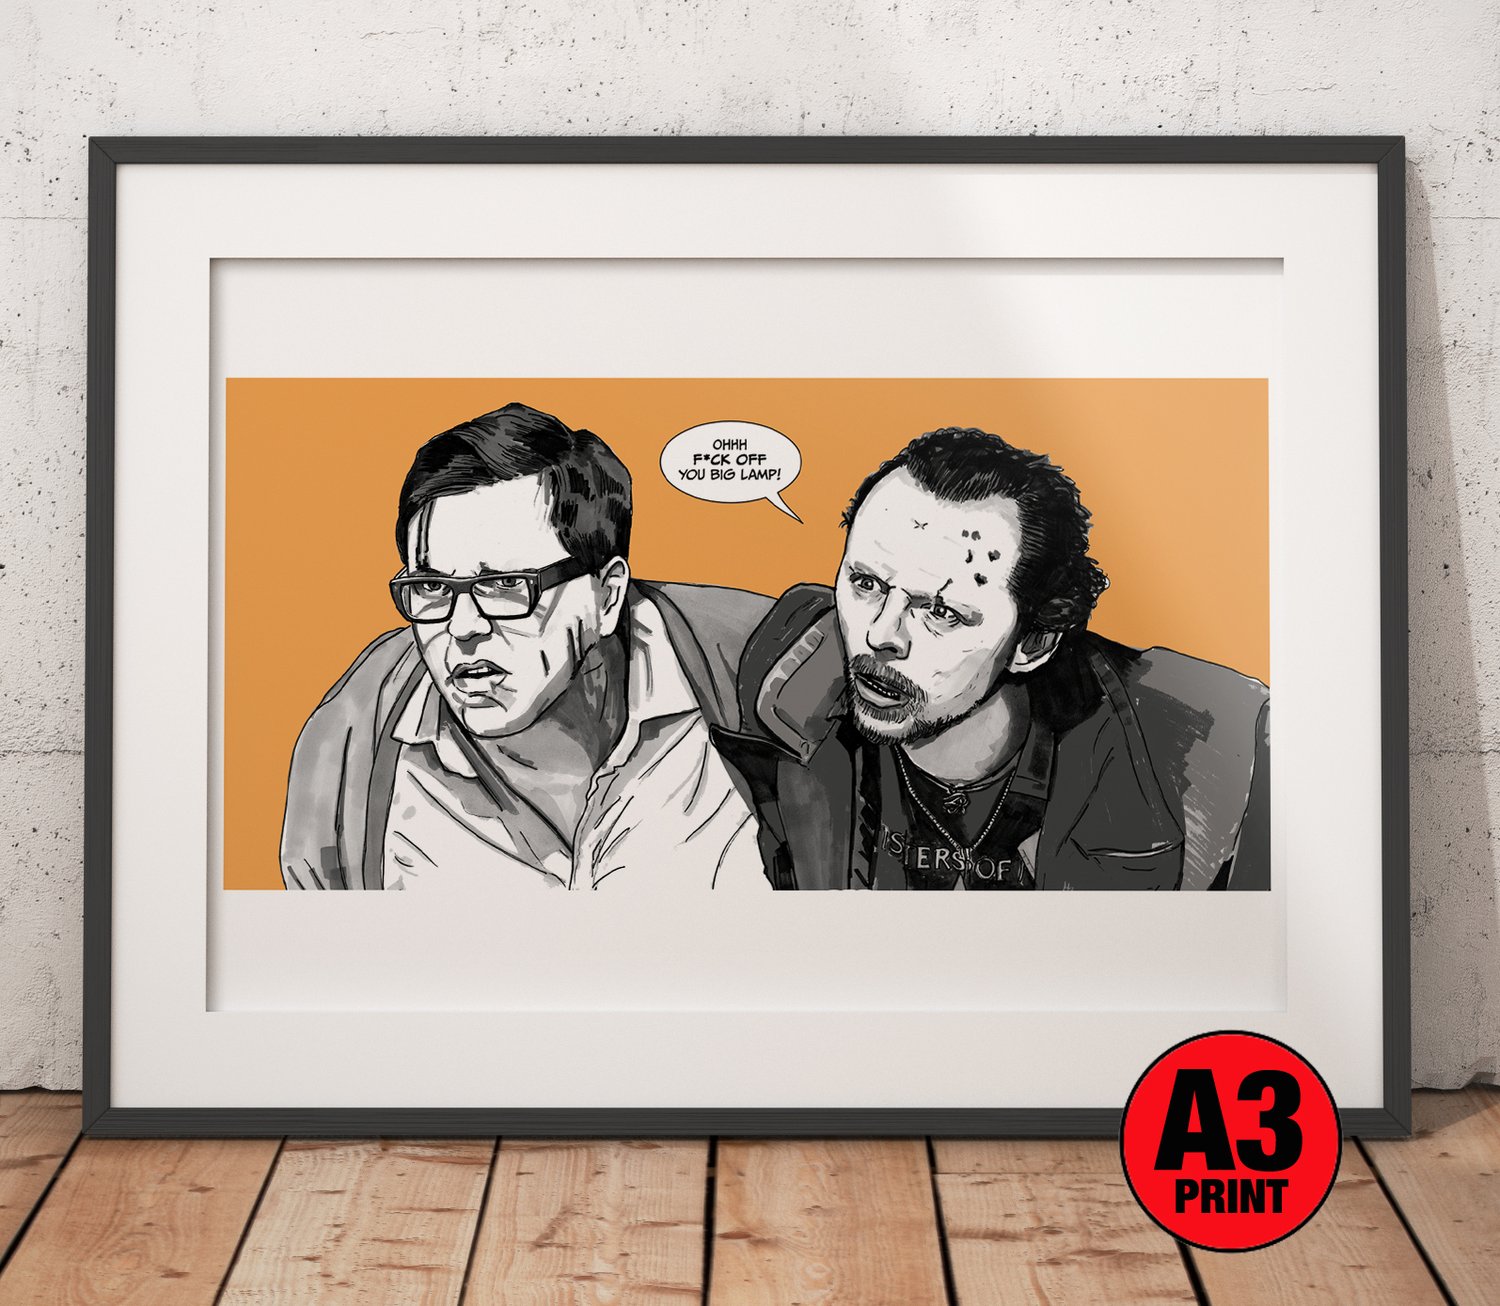 The World's End 'Big Lamp' A3 (16" x 12") Signed Print Comic Style Illustration